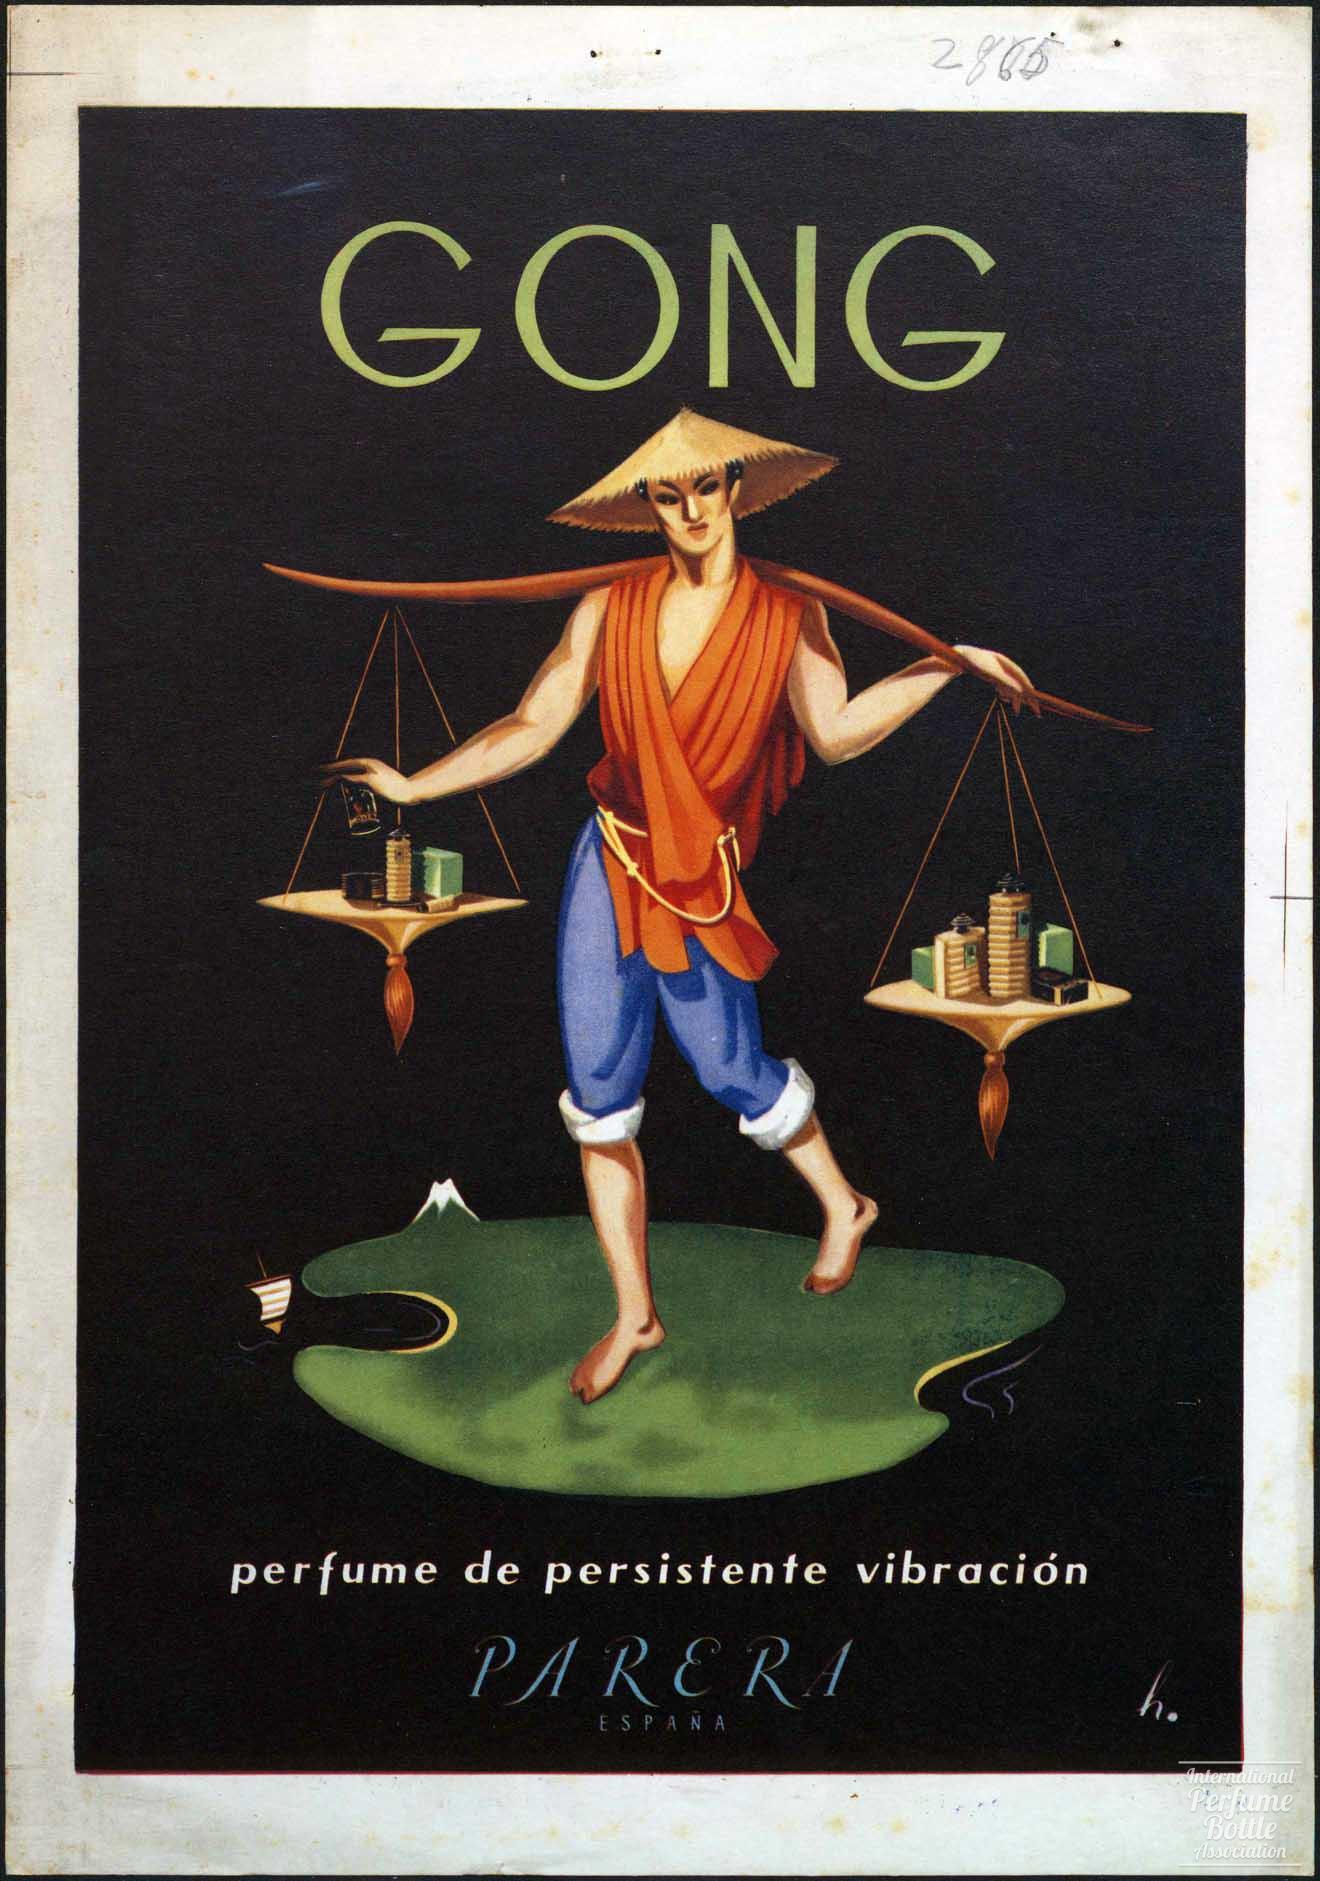 "Gong" by by Perfumería Parera Poster - 1935